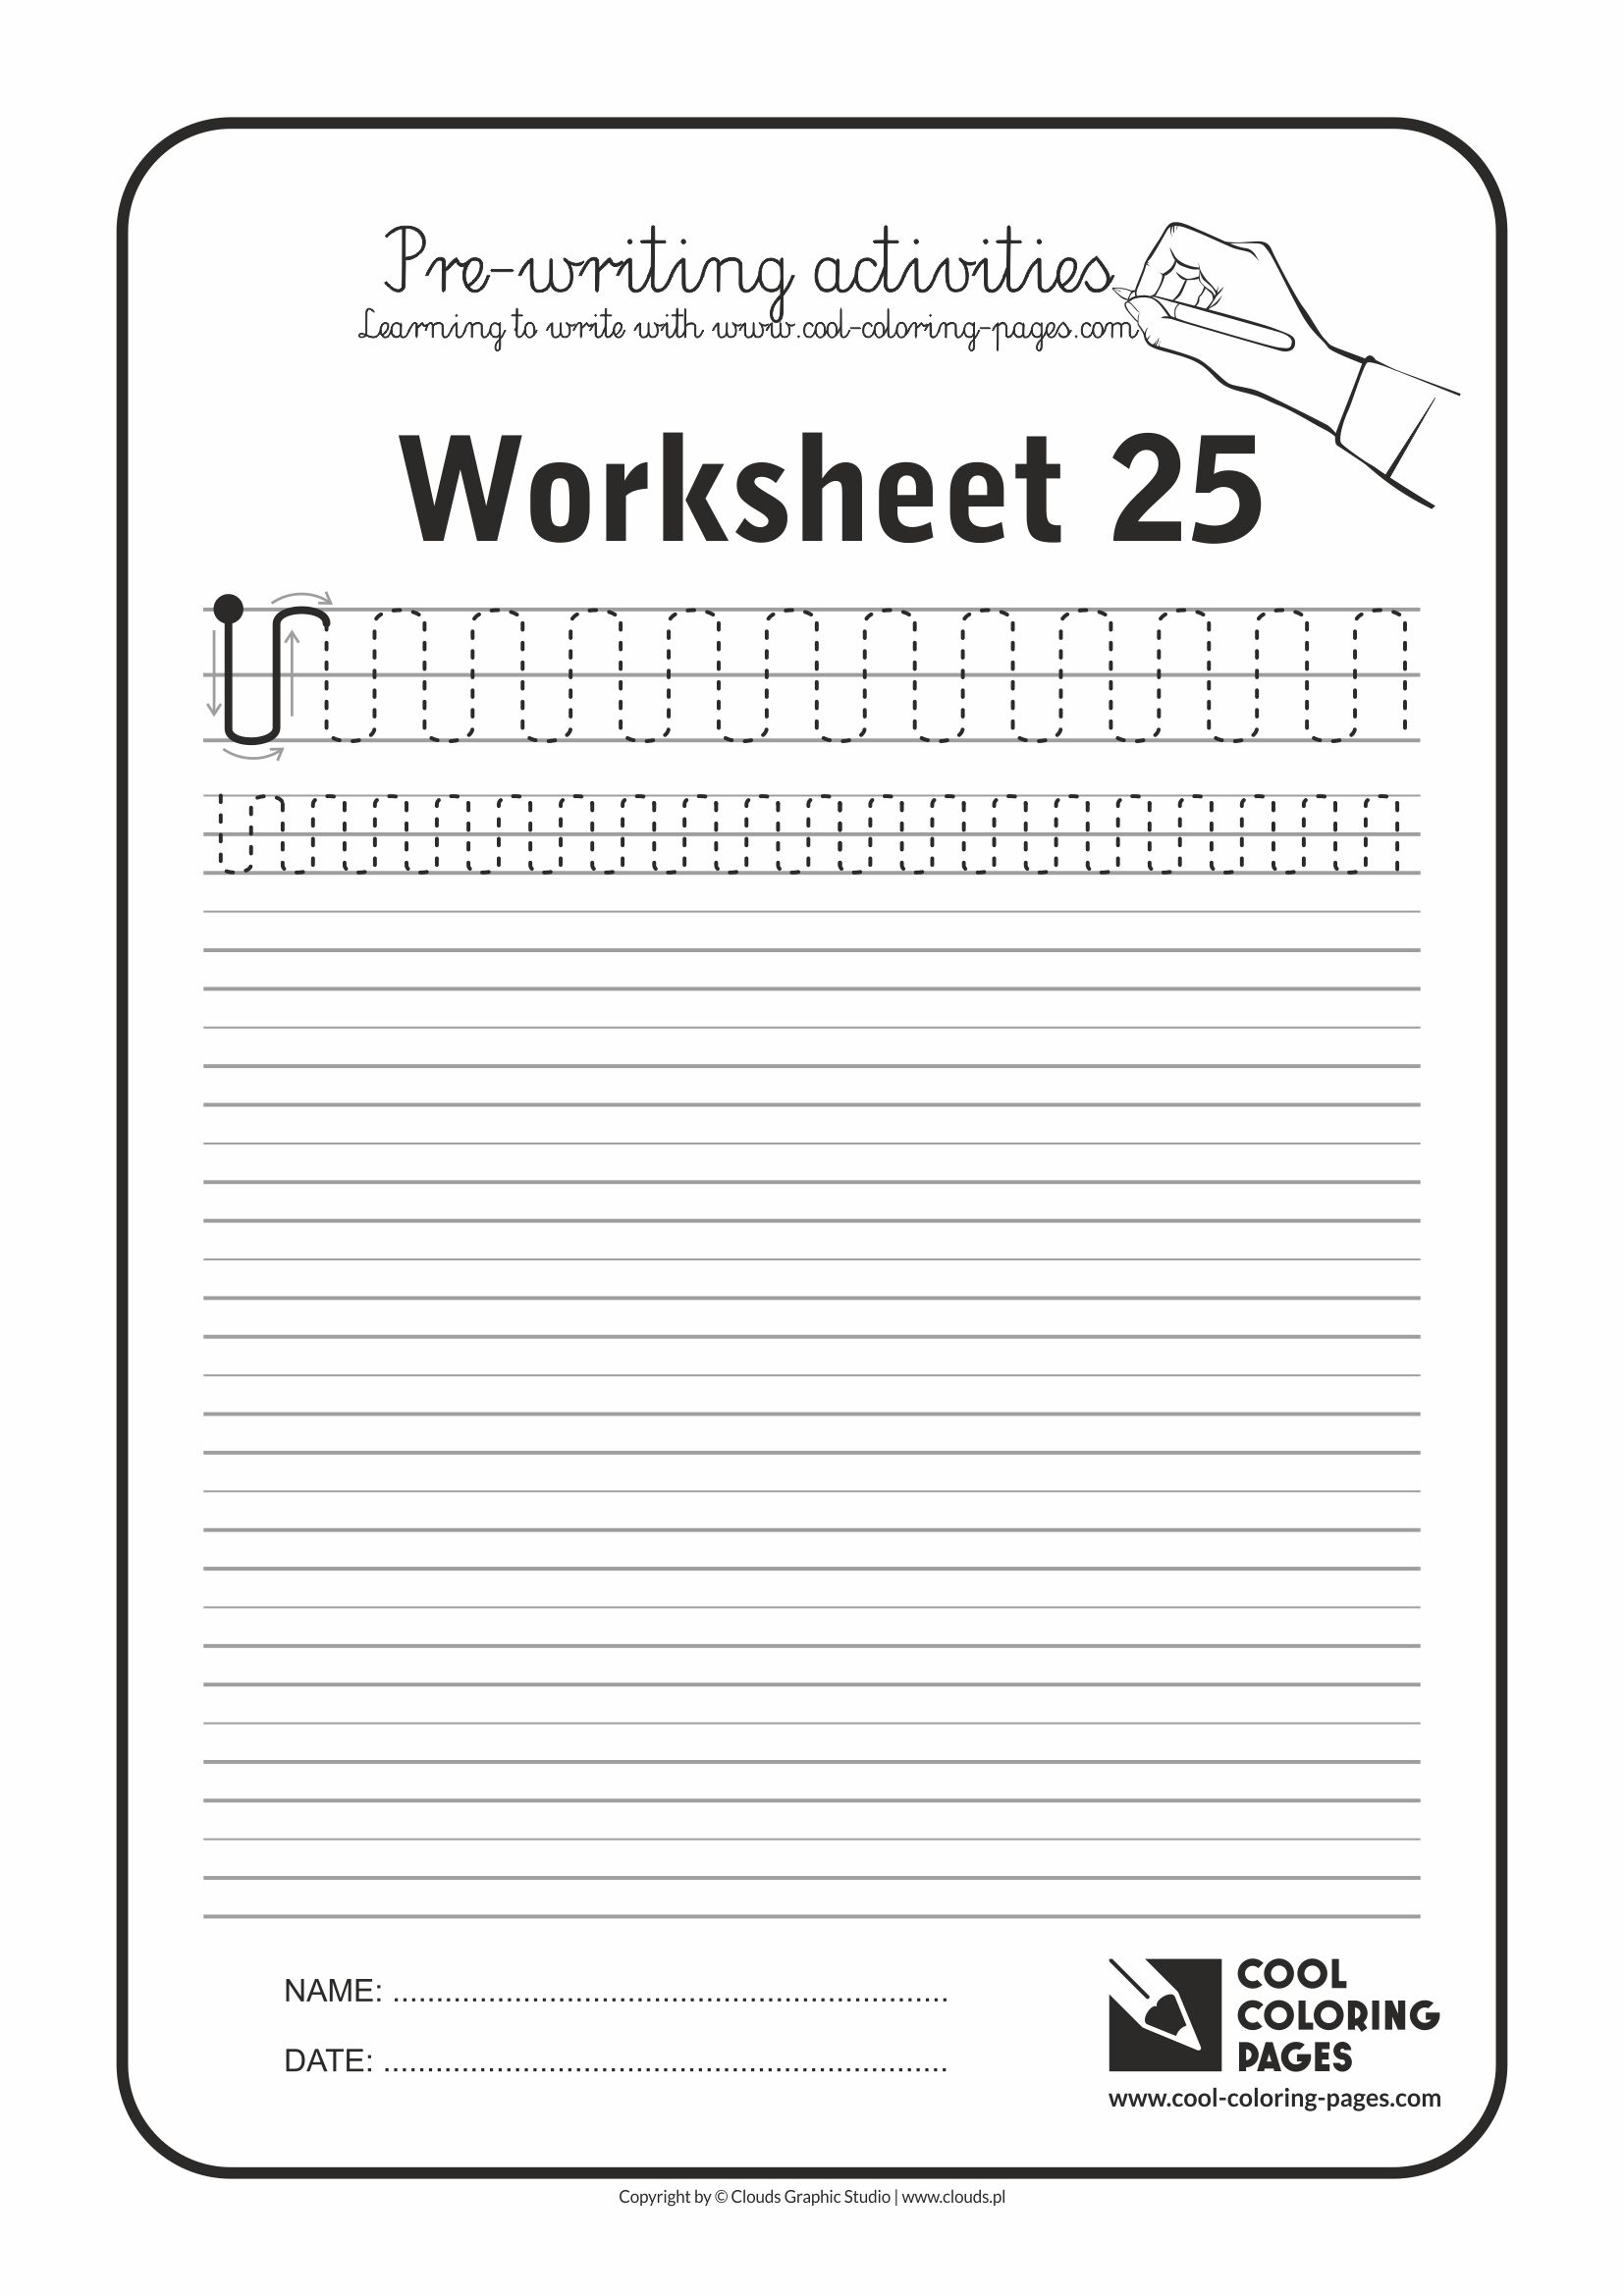 Cool Coloring Pages / Pre-writing activities / Worksheet no.25